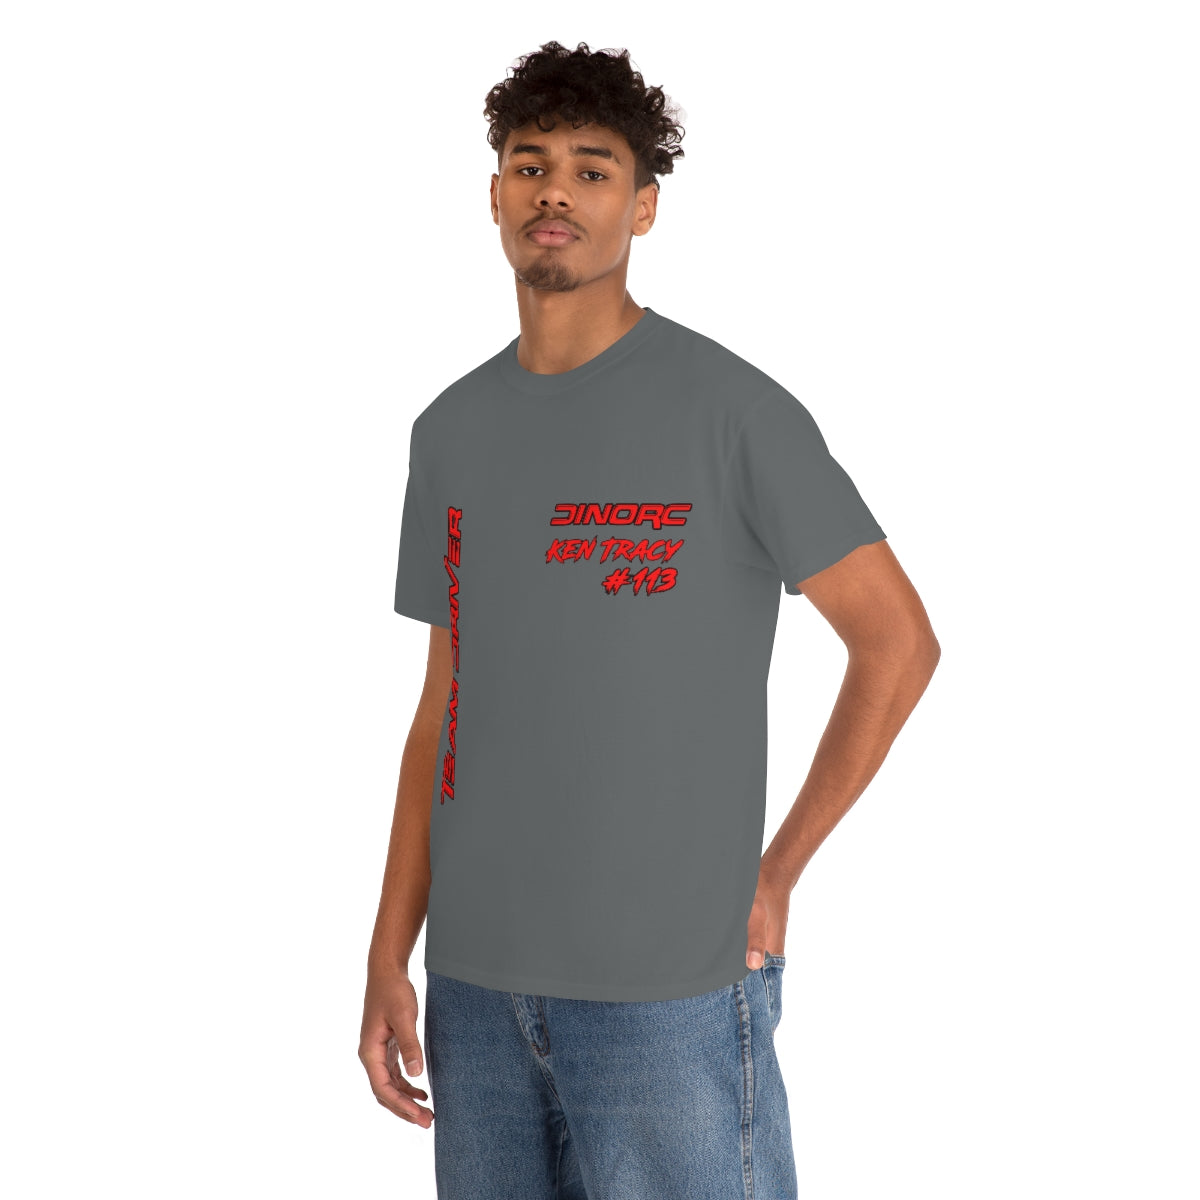 Team Driver Ken Tracy Front and Back DinoRc Logo T-Shirt S-5x 5 colors